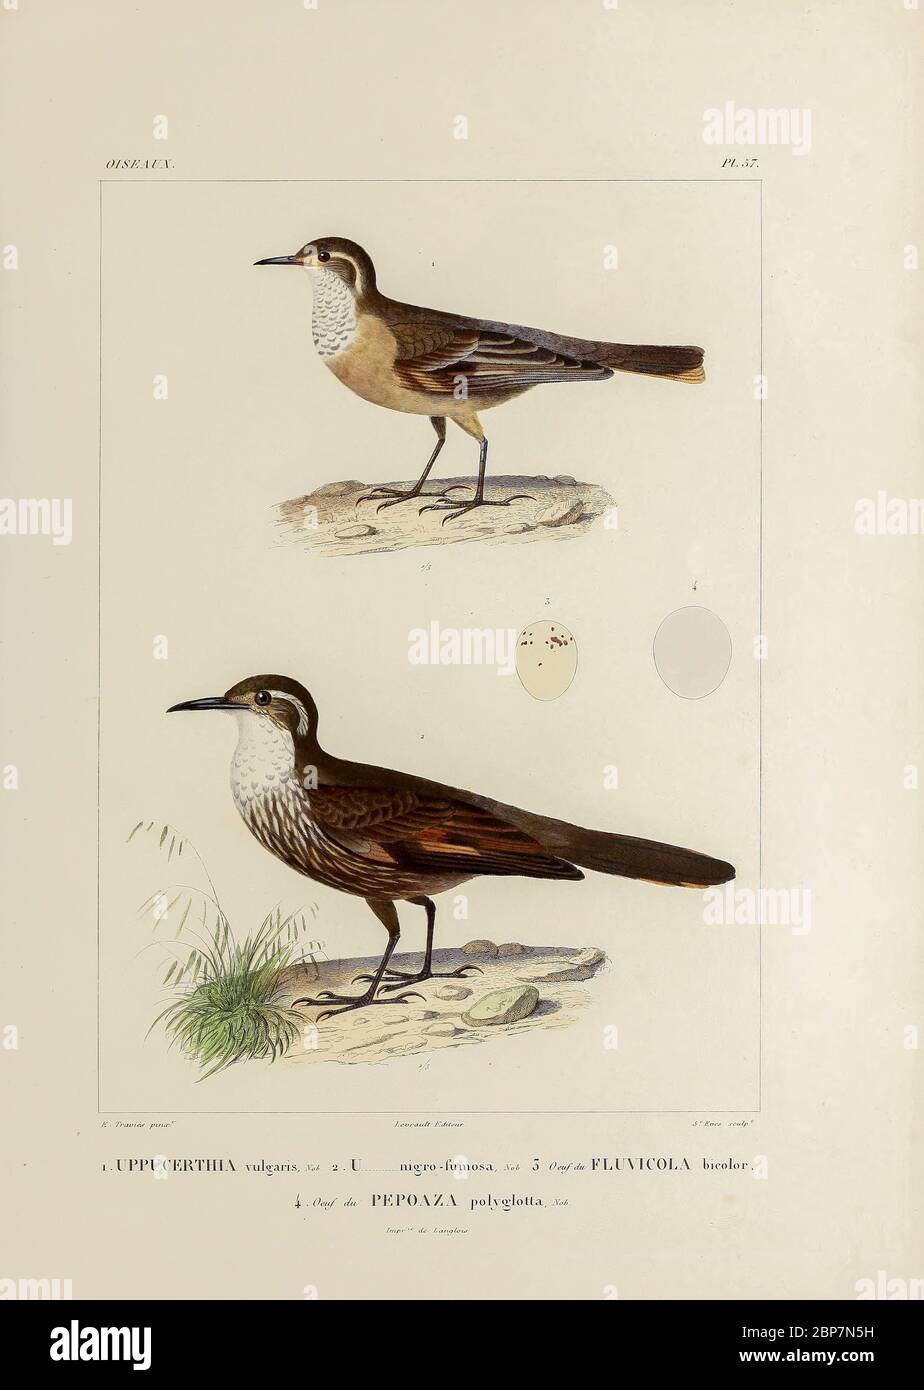 hand coloured sketch Top: buff-winged cinclodes (Cinclodes fuscus) [Here as Uppucerthia vulgaris]) Bottom: Chilean seaside cinclodes (Cinclodes nigrofumosus [Here as Uppucerthia nigro-fumosa]) From the book 'Voyage dans l'Amérique Méridionale' [Journey to South America: (Brazil, the eastern republic of Uruguay, the Argentine Republic, Patagonia, the republic of Chile, the republic of Bolivia, the republic of Peru), executed during the years 1826 - 1833] 4th volume Part 3 By: Orbigny, Alcide Dessalines d', d'Orbigny, 1802-1857; Montagne, Jean François Camille, 1784-1866; Martius, Karl Friedric Stock Photo